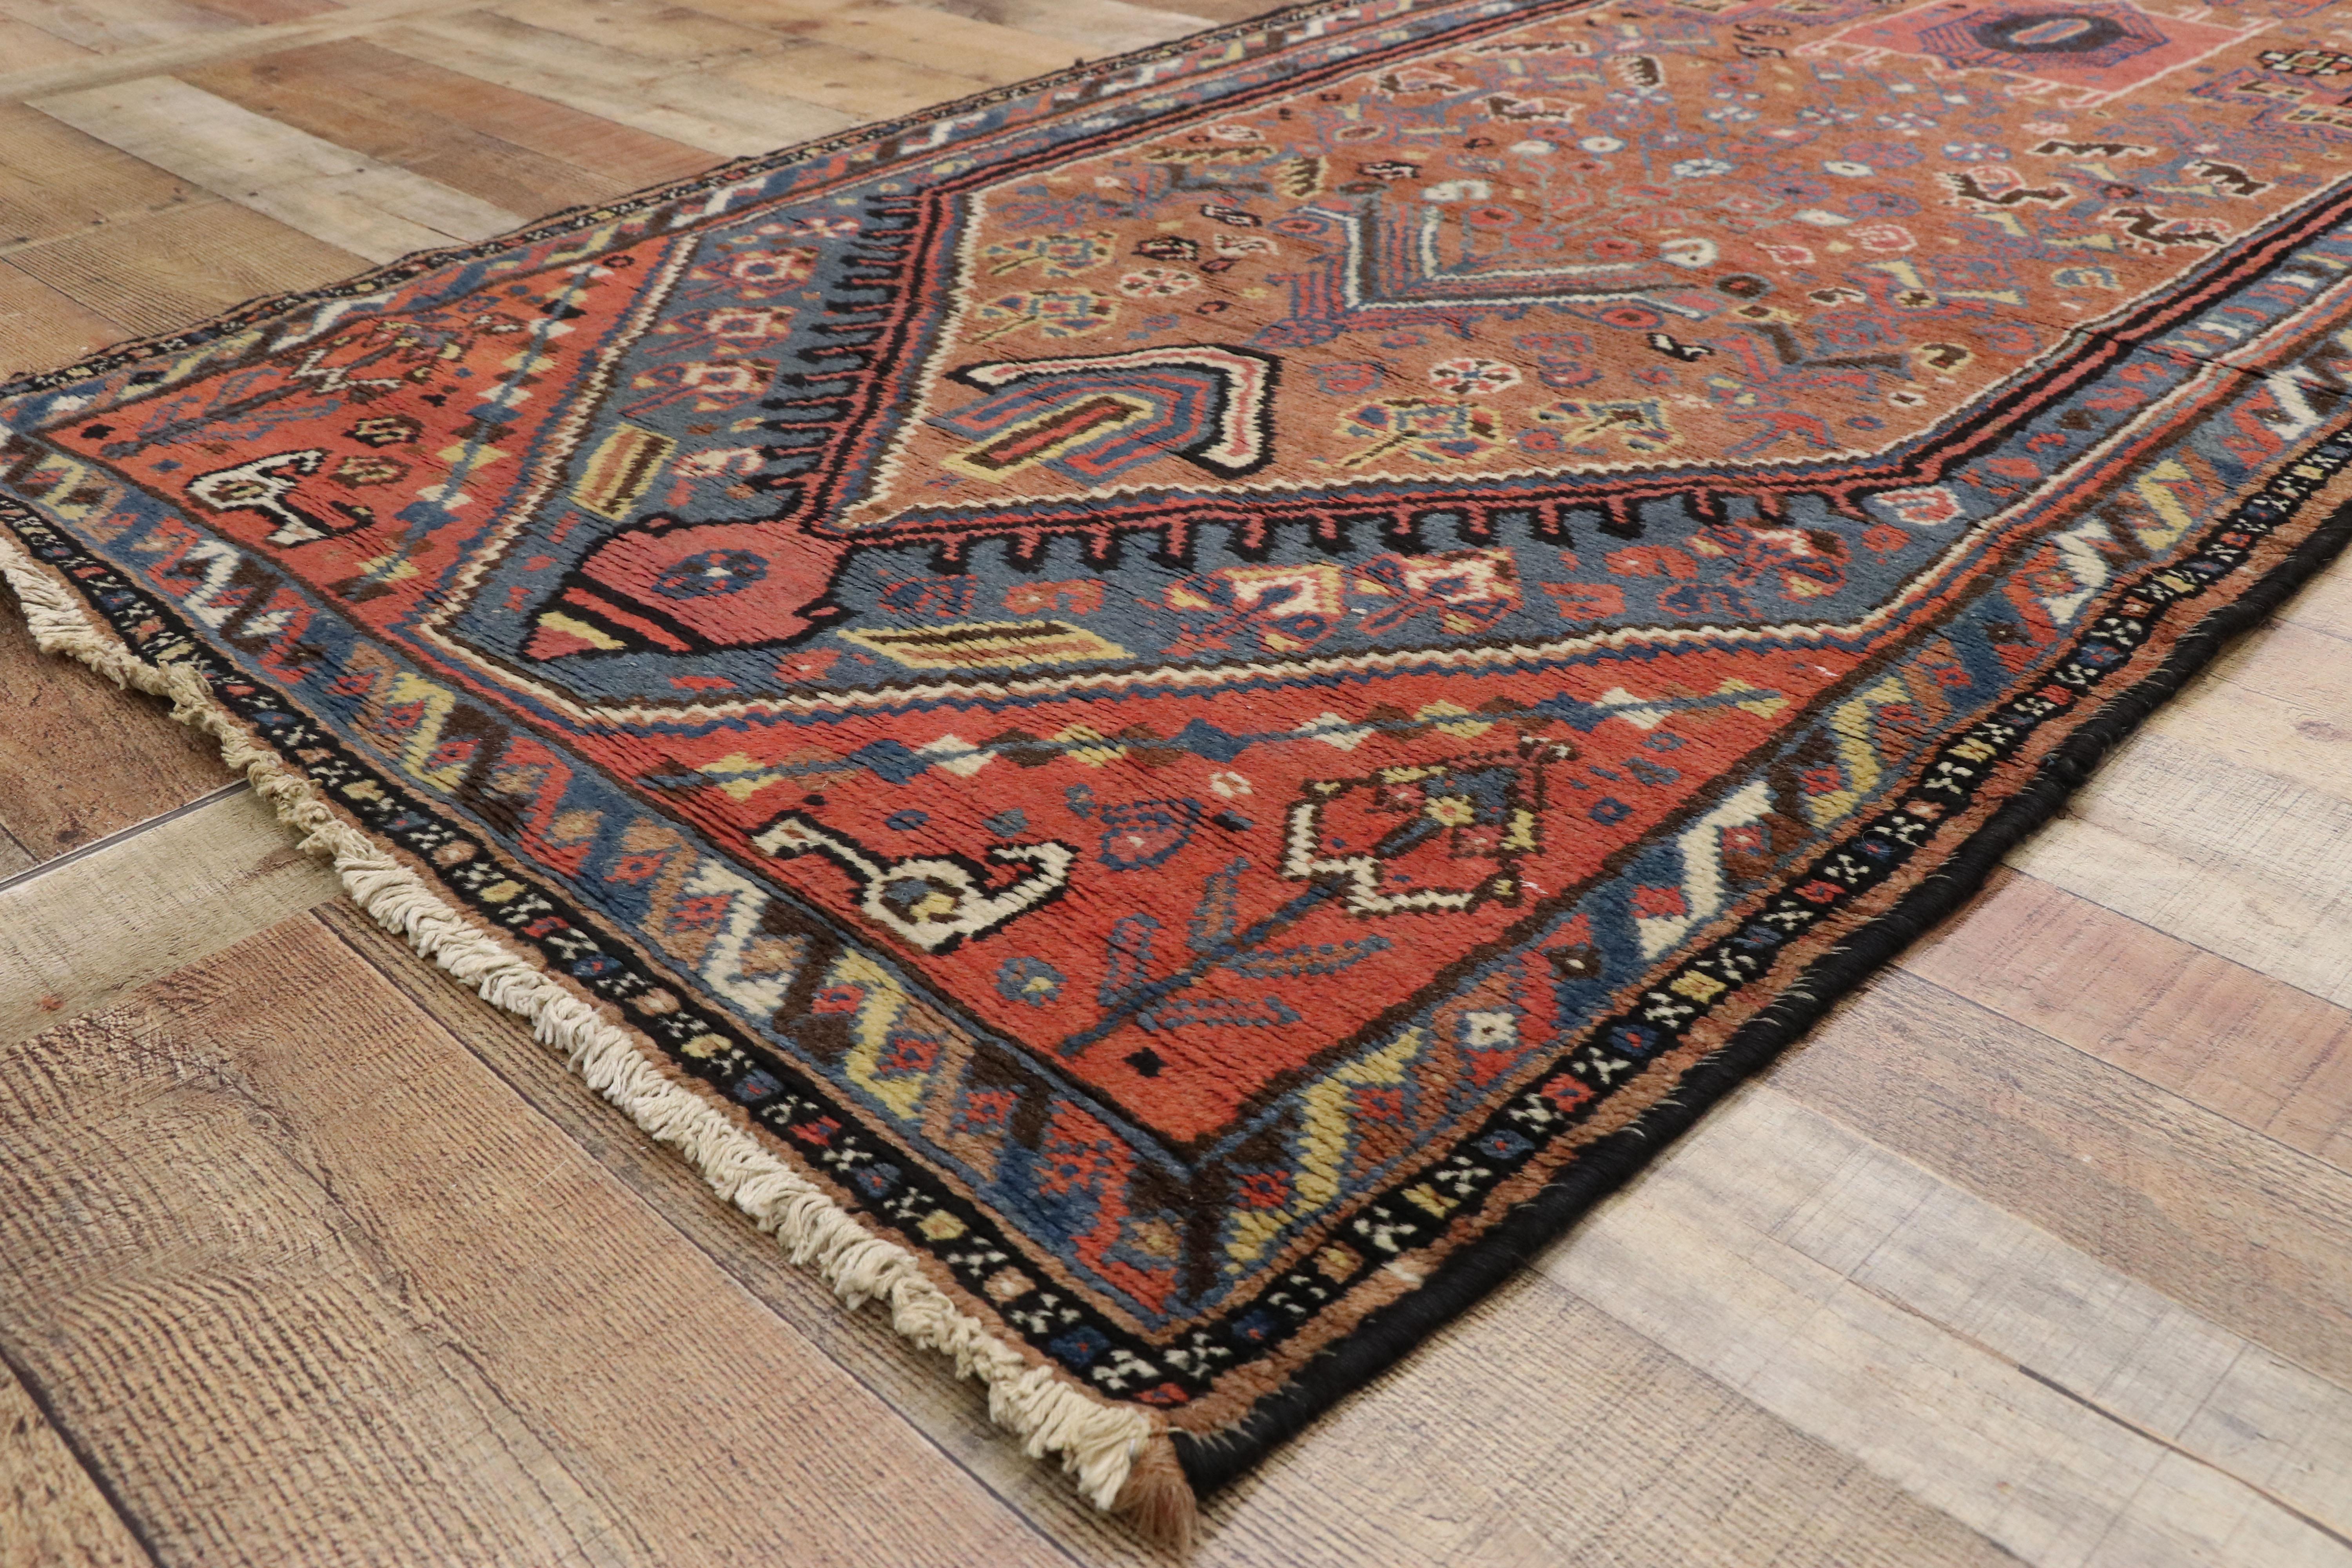 20th Century Antique Malayer Persian Runner with Mid-Century Modern Tribal Style